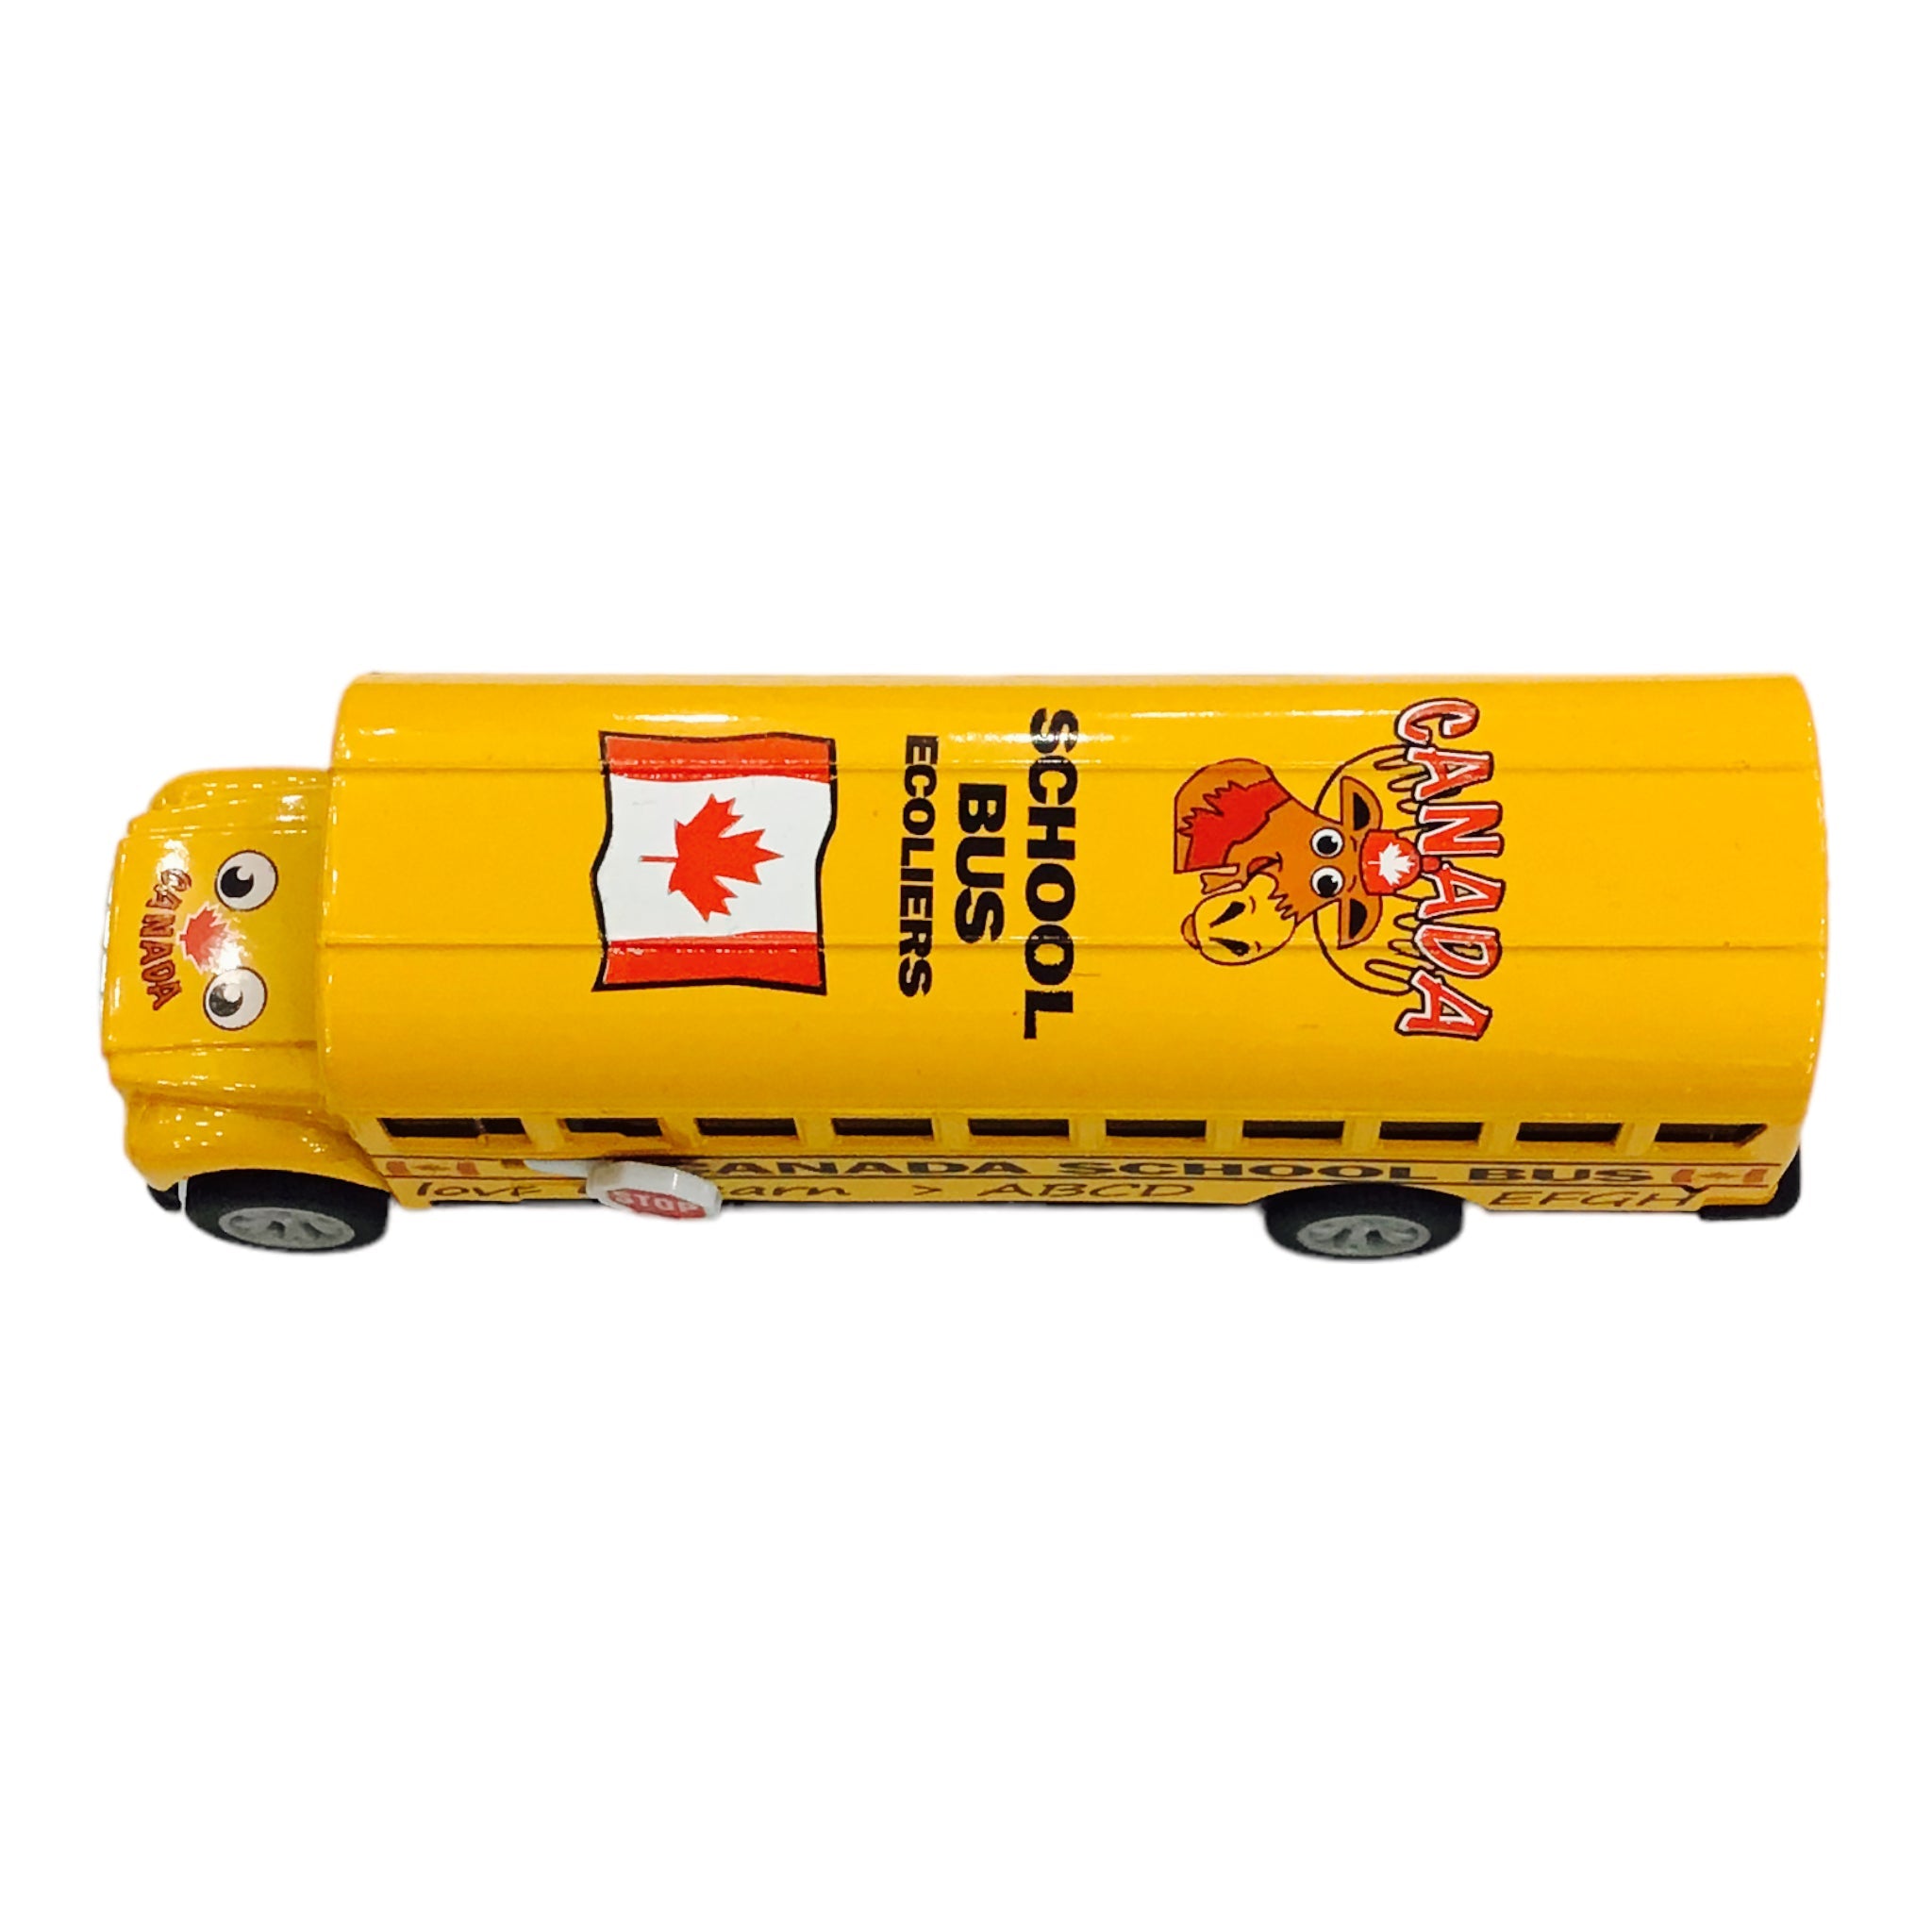 Canada School Bus Metal Diecast Truck Toys Collection